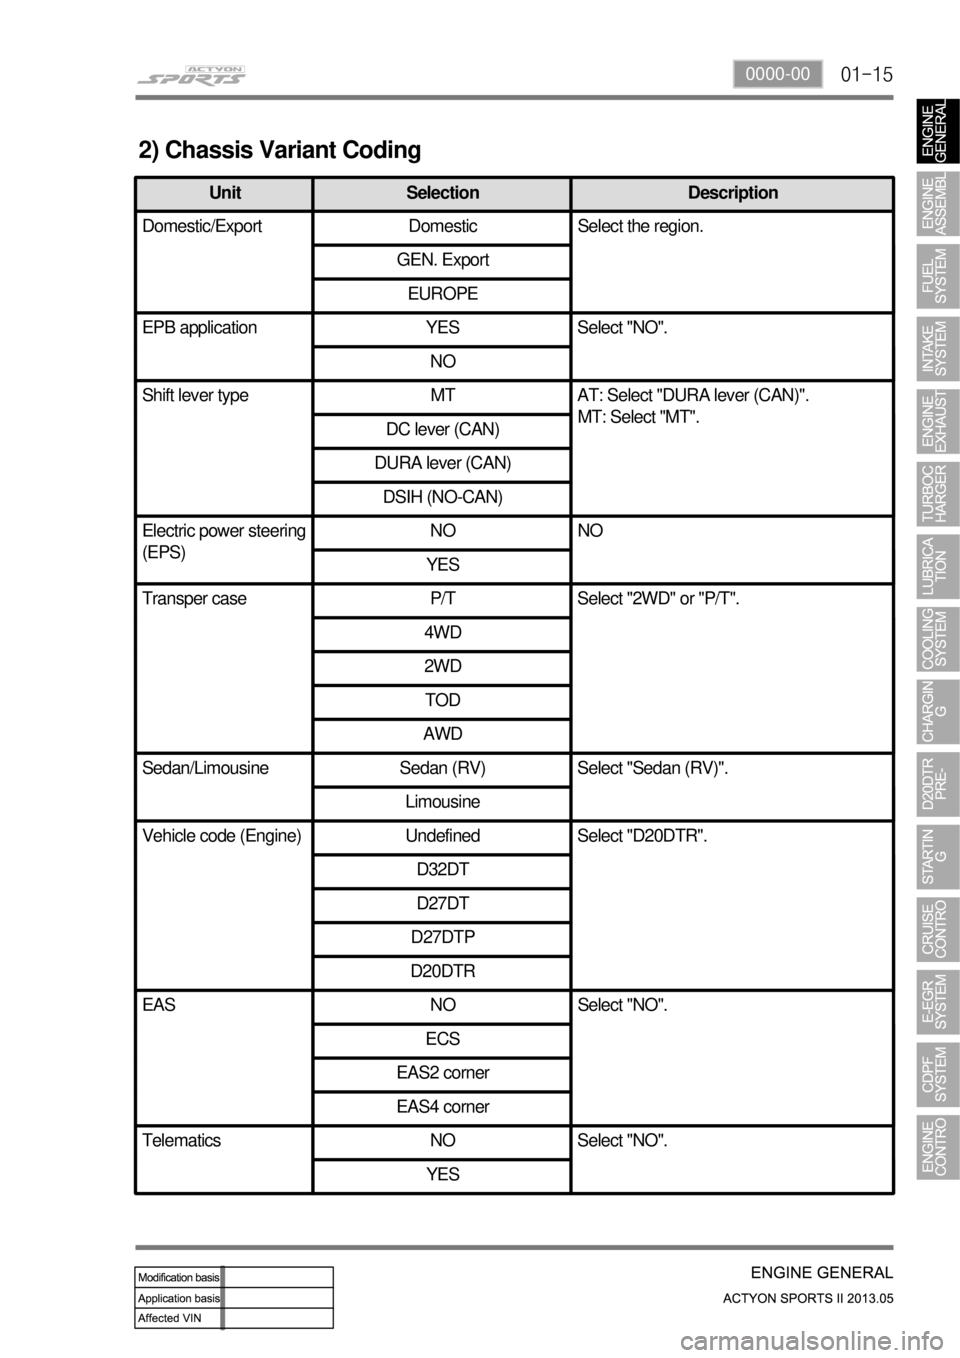 SSANGYONG NEW ACTYON SPORTS 2013 Owners Guide 01-150000-00
2) Chassis Variant Coding
Unit Selection Description
Domestic/Export Domestic Select the region.
GEN. Export
EUROPE
EPB application YES Select "NO".
NO
Shift lever type MT AT: Select "DUR